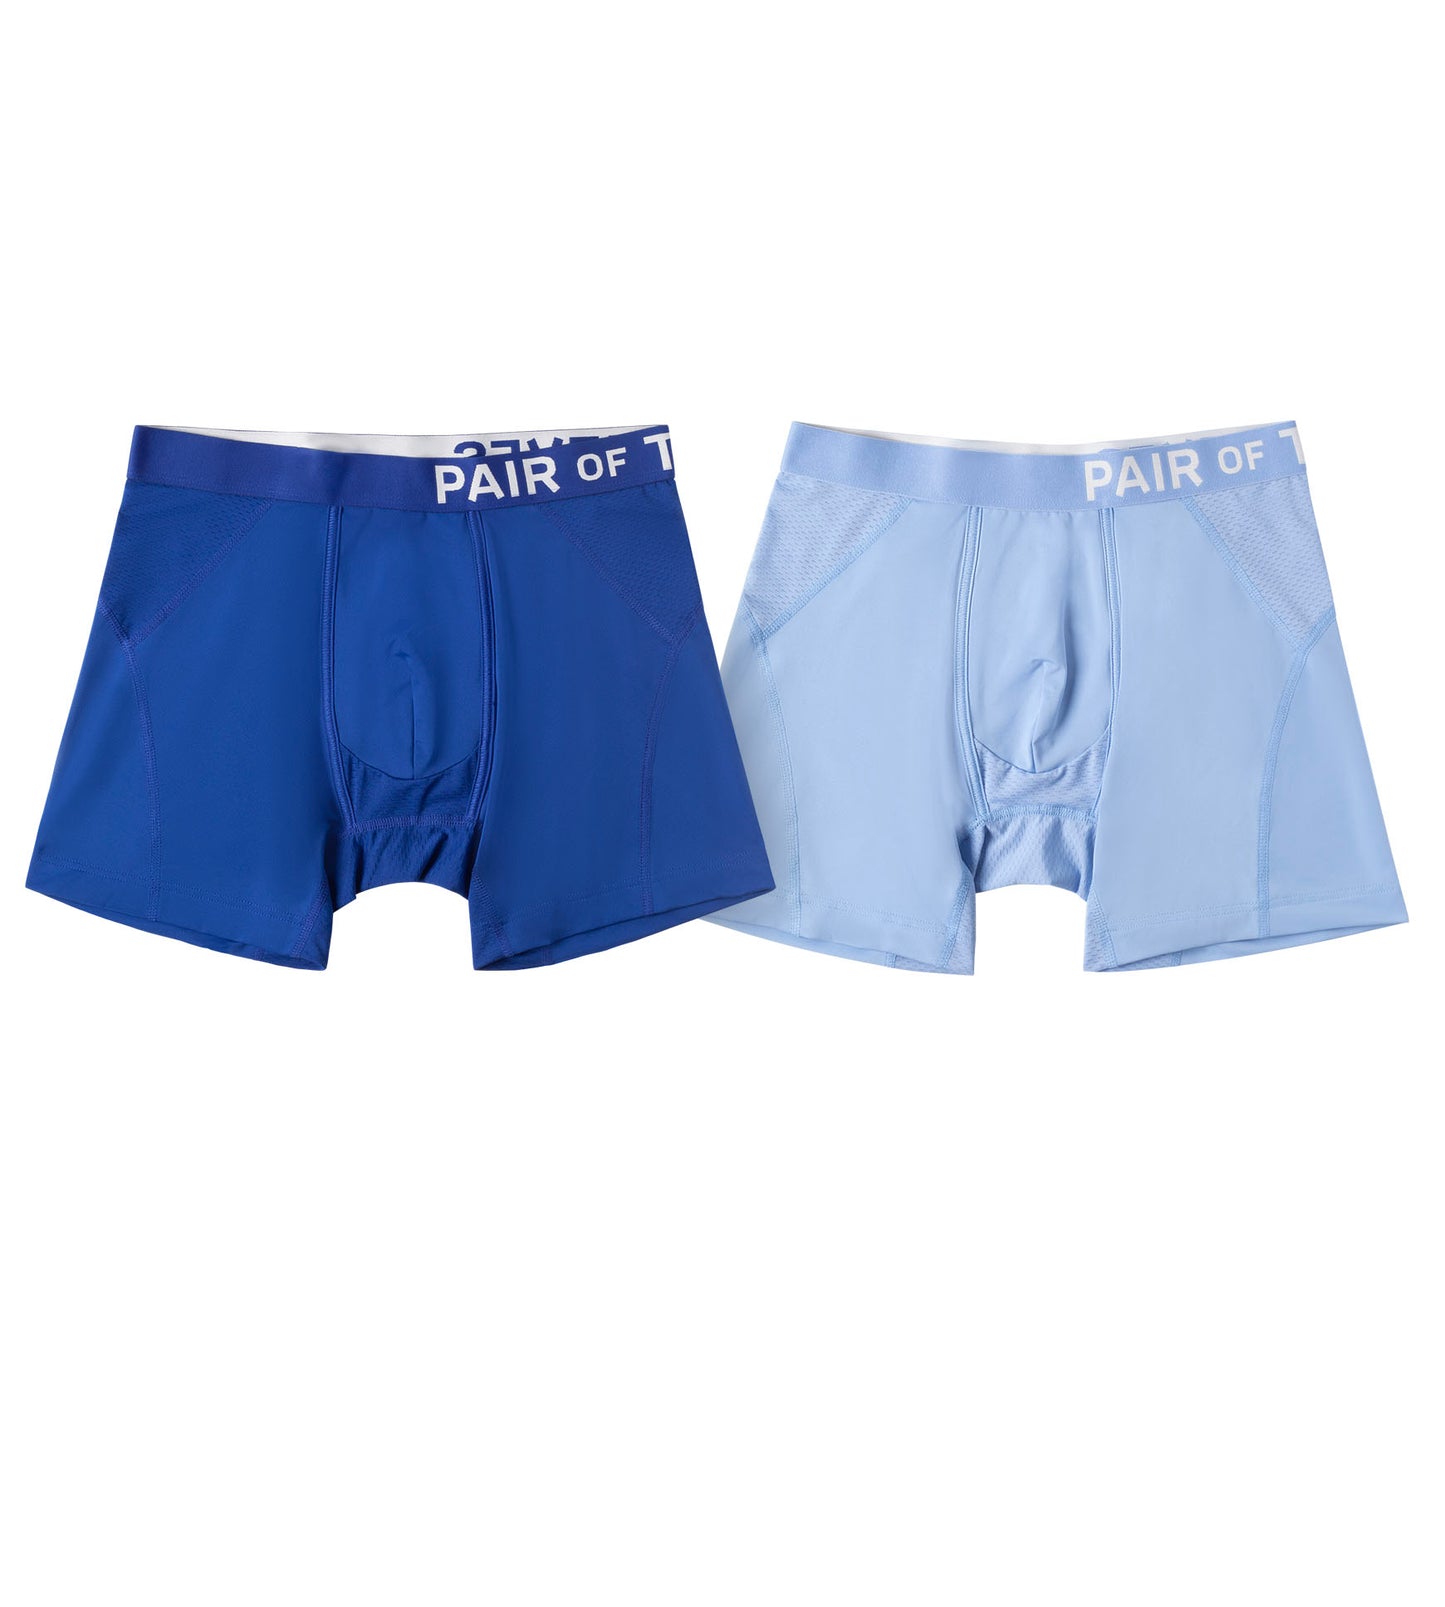 Buy Pair of Thieves Men's 3 Pack Cool Breeze Boxer Briefs, Circle Meets  Square, X-Large at